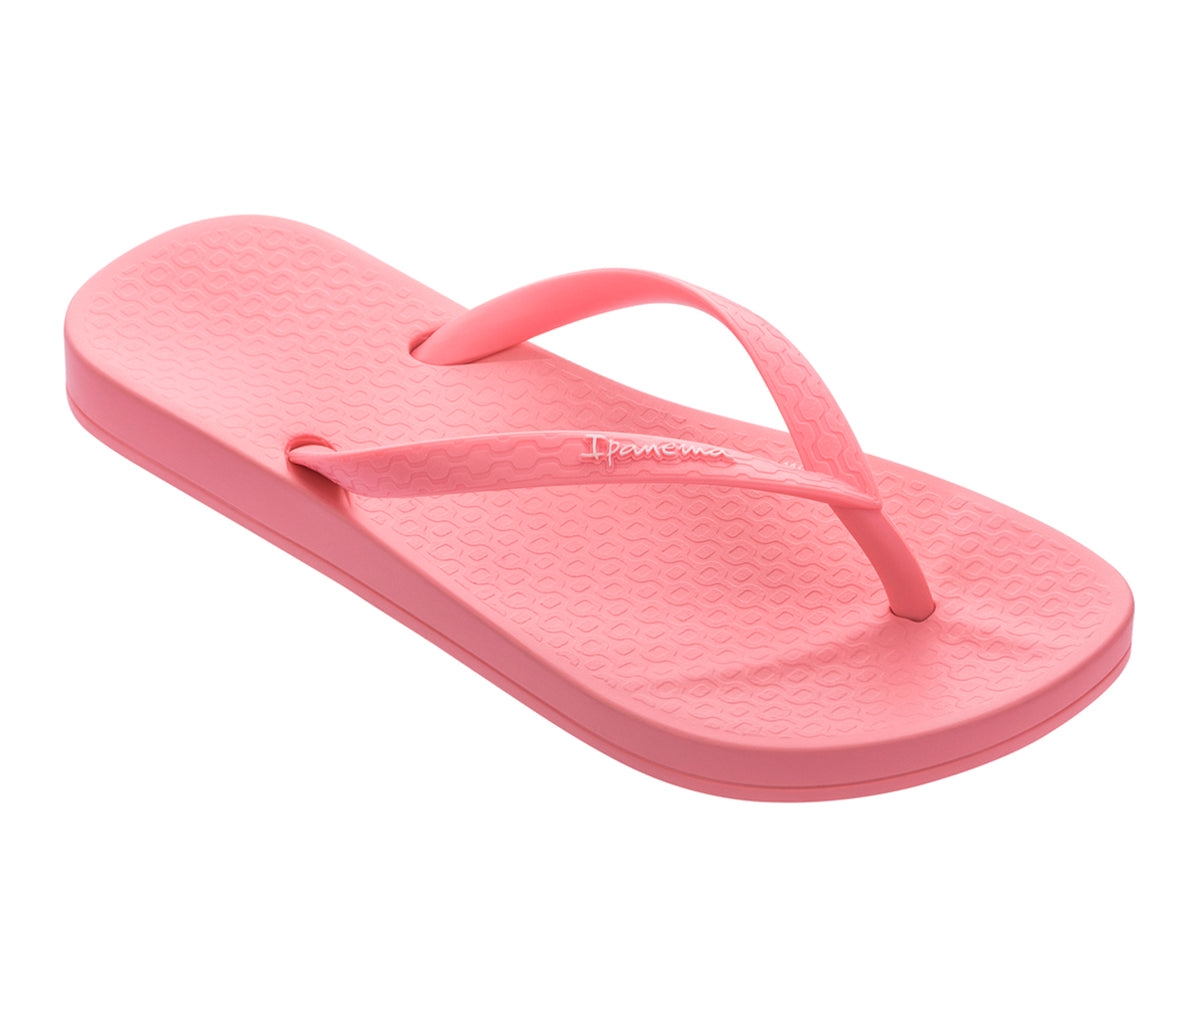 Angled view of a light pink Ipanema Ana Colors kids flip flop.